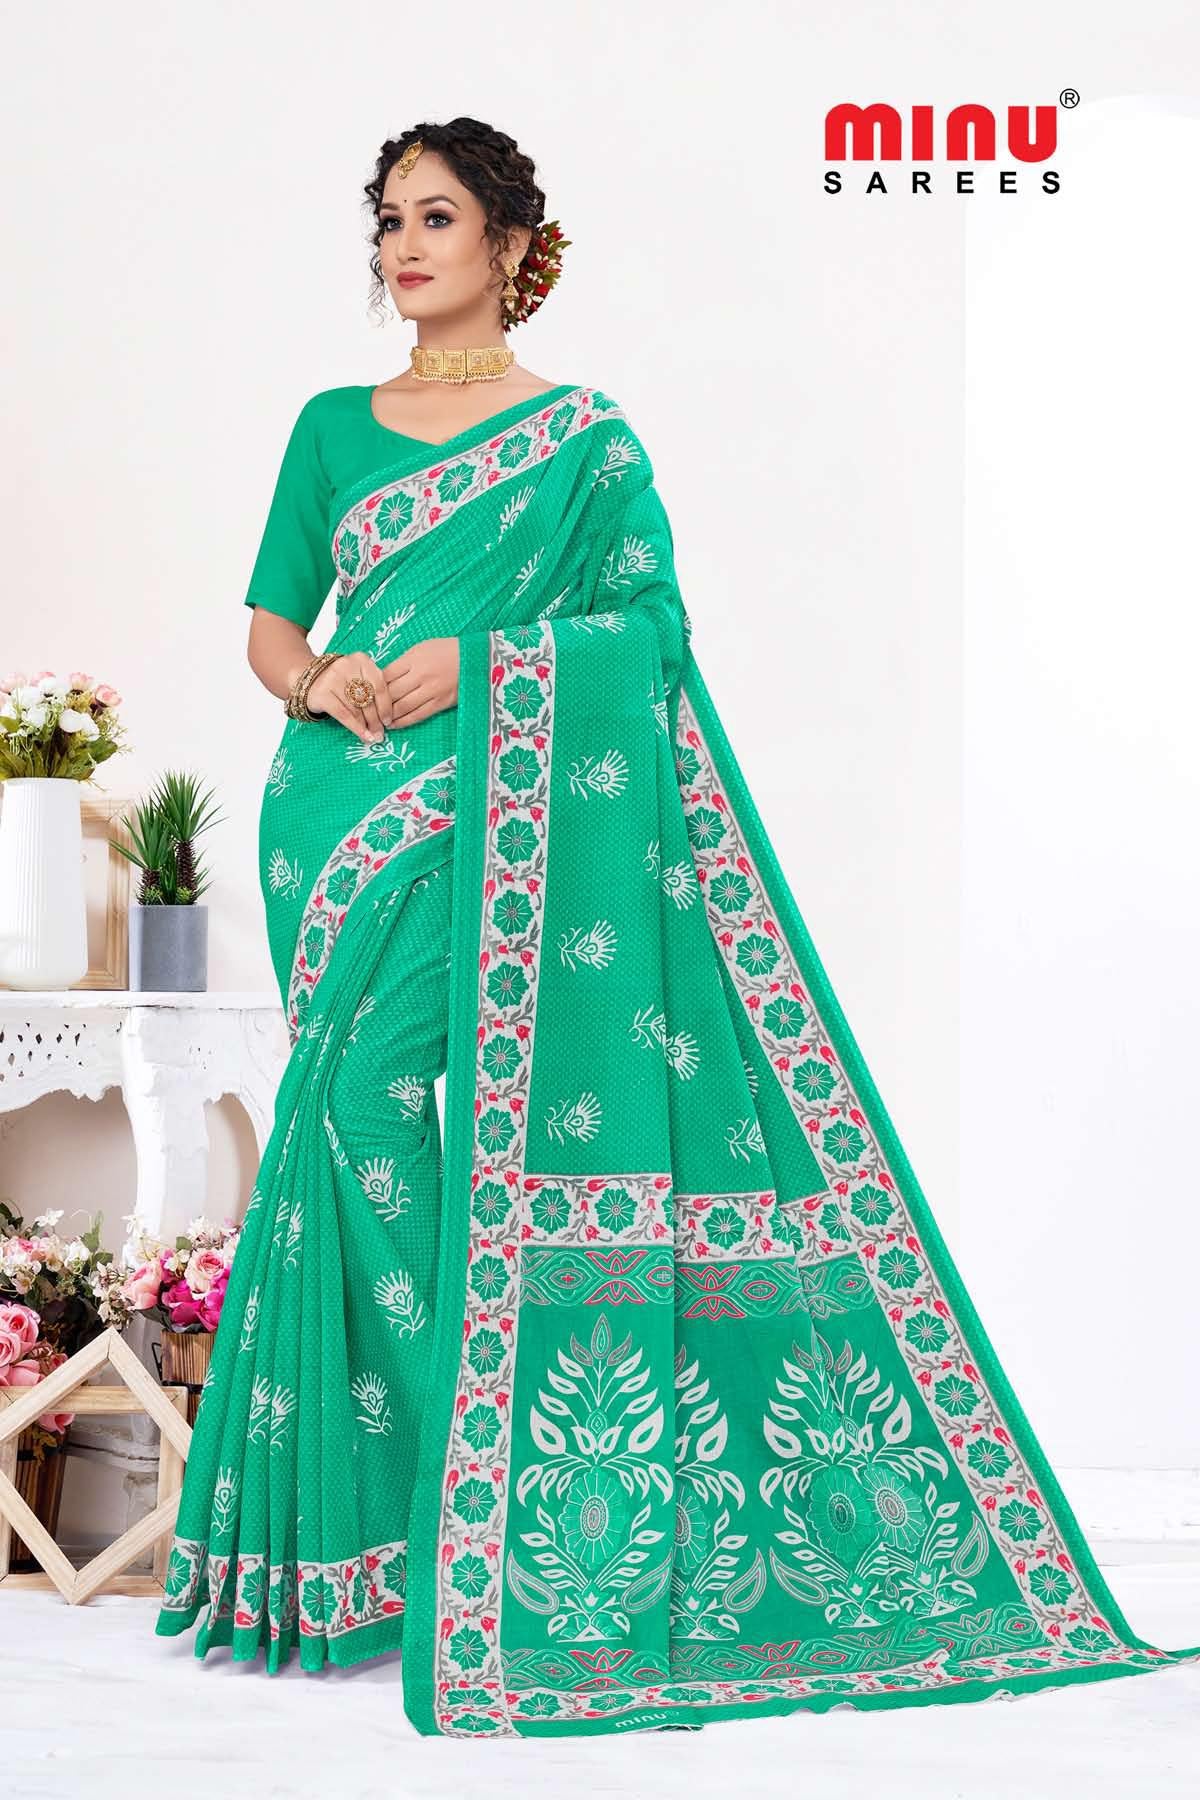 Premium Cotton Saree Without Blouse Piece : A Palette Of Comfort And Style